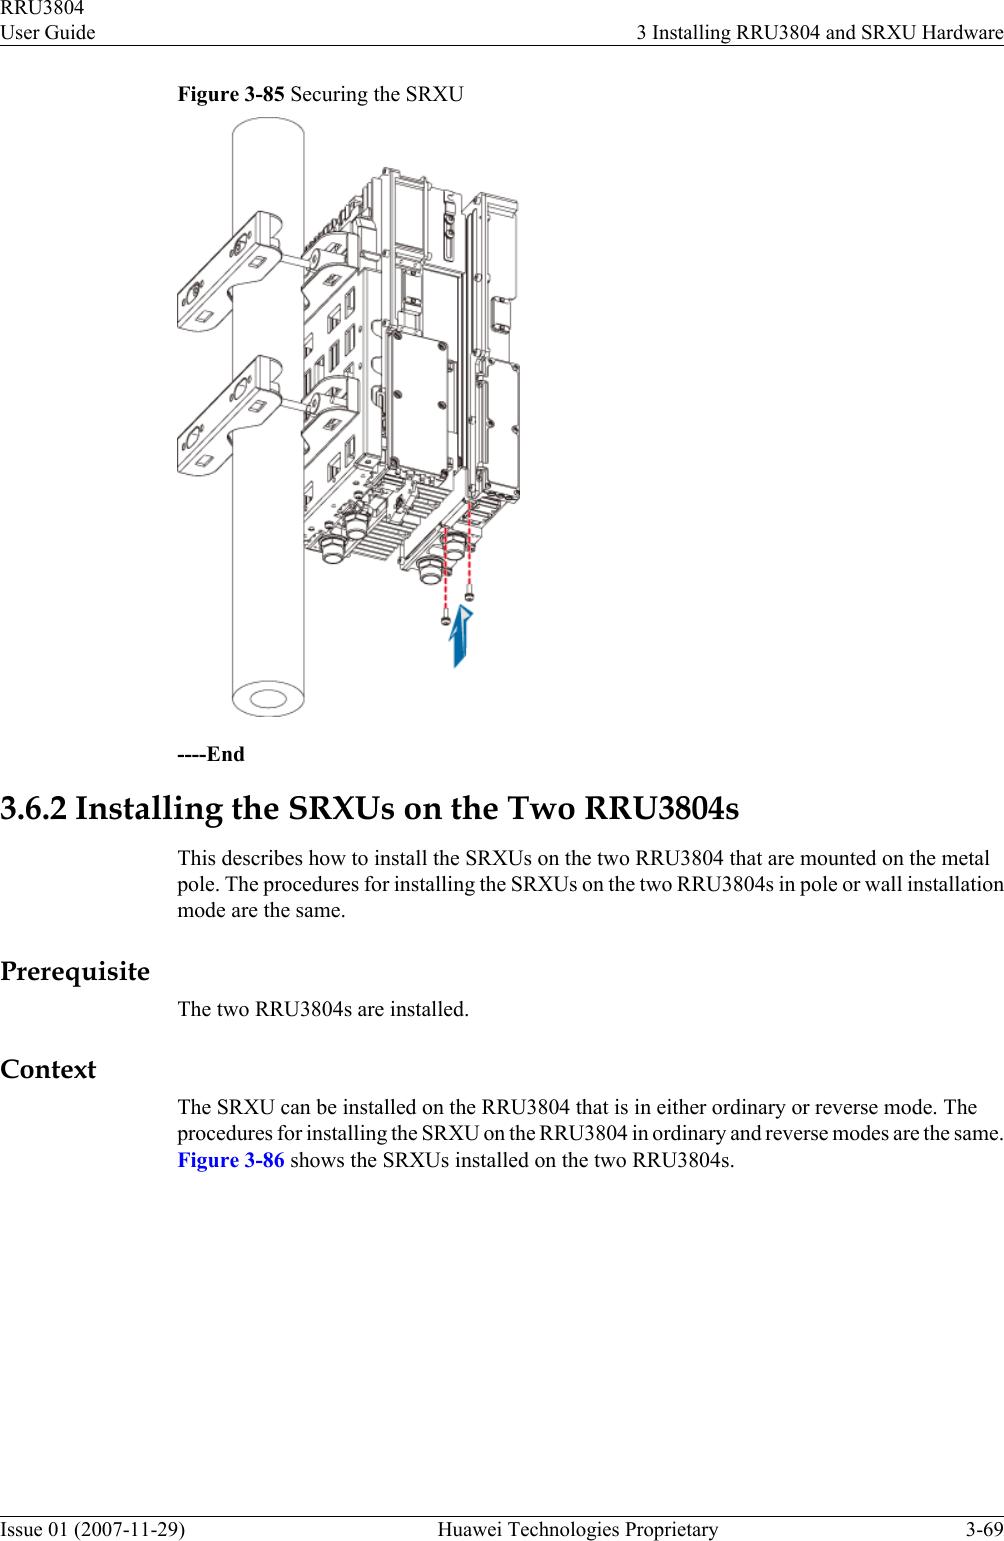 Figure 3-85 Securing the SRXU----End3.6.2 Installing the SRXUs on the Two RRU3804sThis describes how to install the SRXUs on the two RRU3804 that are mounted on the metalpole. The procedures for installing the SRXUs on the two RRU3804s in pole or wall installationmode are the same.PrerequisiteThe two RRU3804s are installed.ContextThe SRXU can be installed on the RRU3804 that is in either ordinary or reverse mode. Theprocedures for installing the SRXU on the RRU3804 in ordinary and reverse modes are the same.Figure 3-86 shows the SRXUs installed on the two RRU3804s.RRU3804User Guide 3 Installing RRU3804 and SRXU HardwareIssue 01 (2007-11-29)  Huawei Technologies Proprietary 3-69